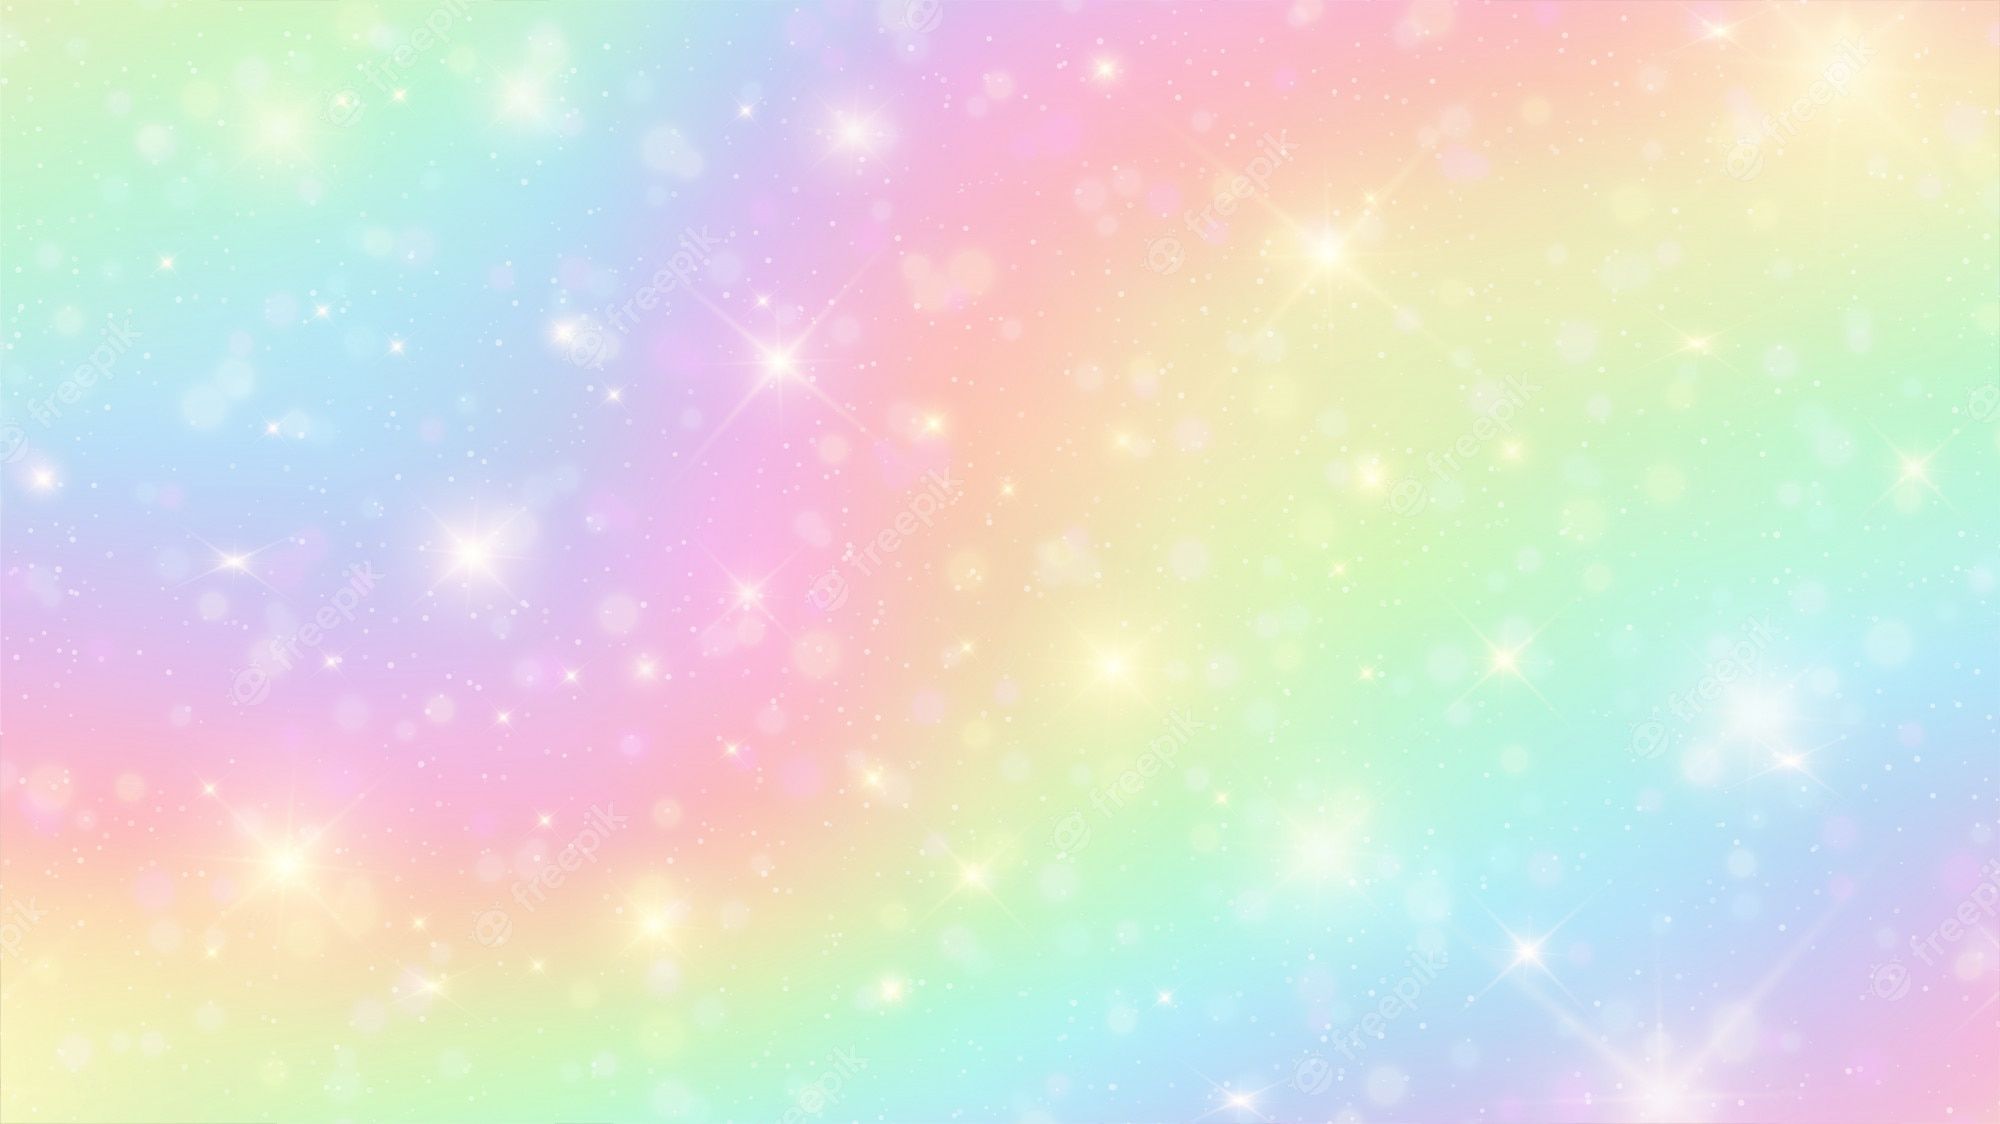 A colorful rainbow background with sparkles and bokeh - Pastel rainbow